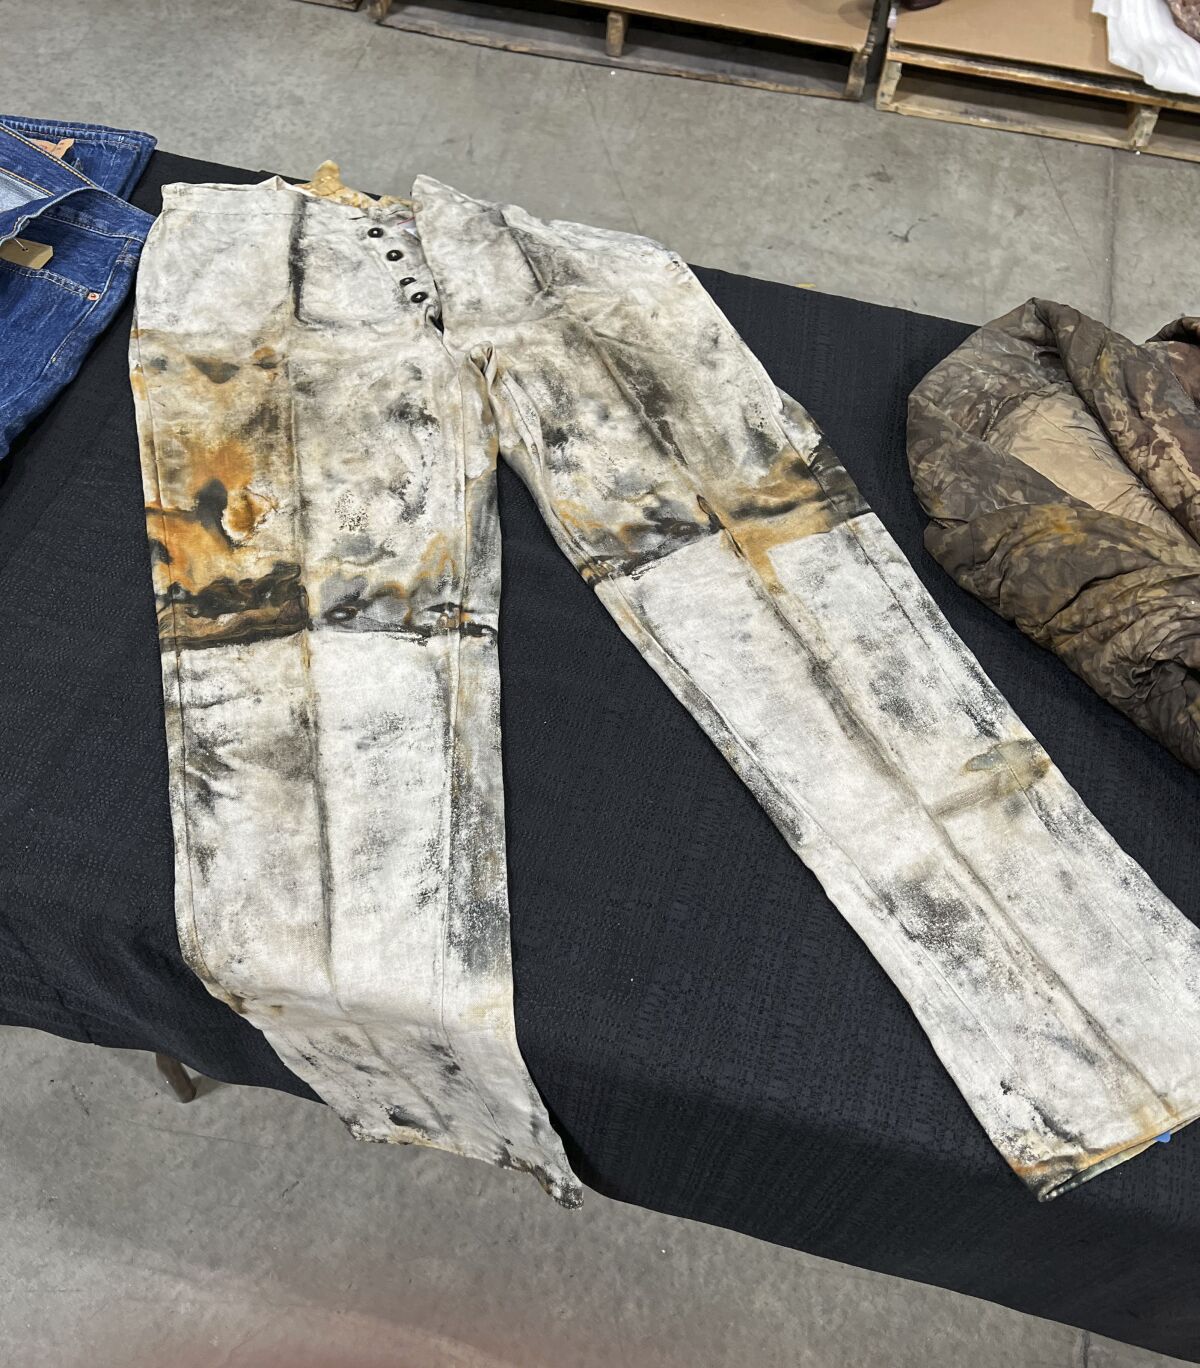 In this undated photo provided by Holabird Western Americana Collections are miner's work pants with a five-button fly, recovered from the 1857 sinking of the S.S. Central America, that may have been made by or for Levi Strauss during the California Gold Rush-era. They sold for $114,000 in an auction conducted by Holabird Western Americana Collections in Reno, Nev., on December 3, 2022. (Holabird Western Americana Collections via AP)